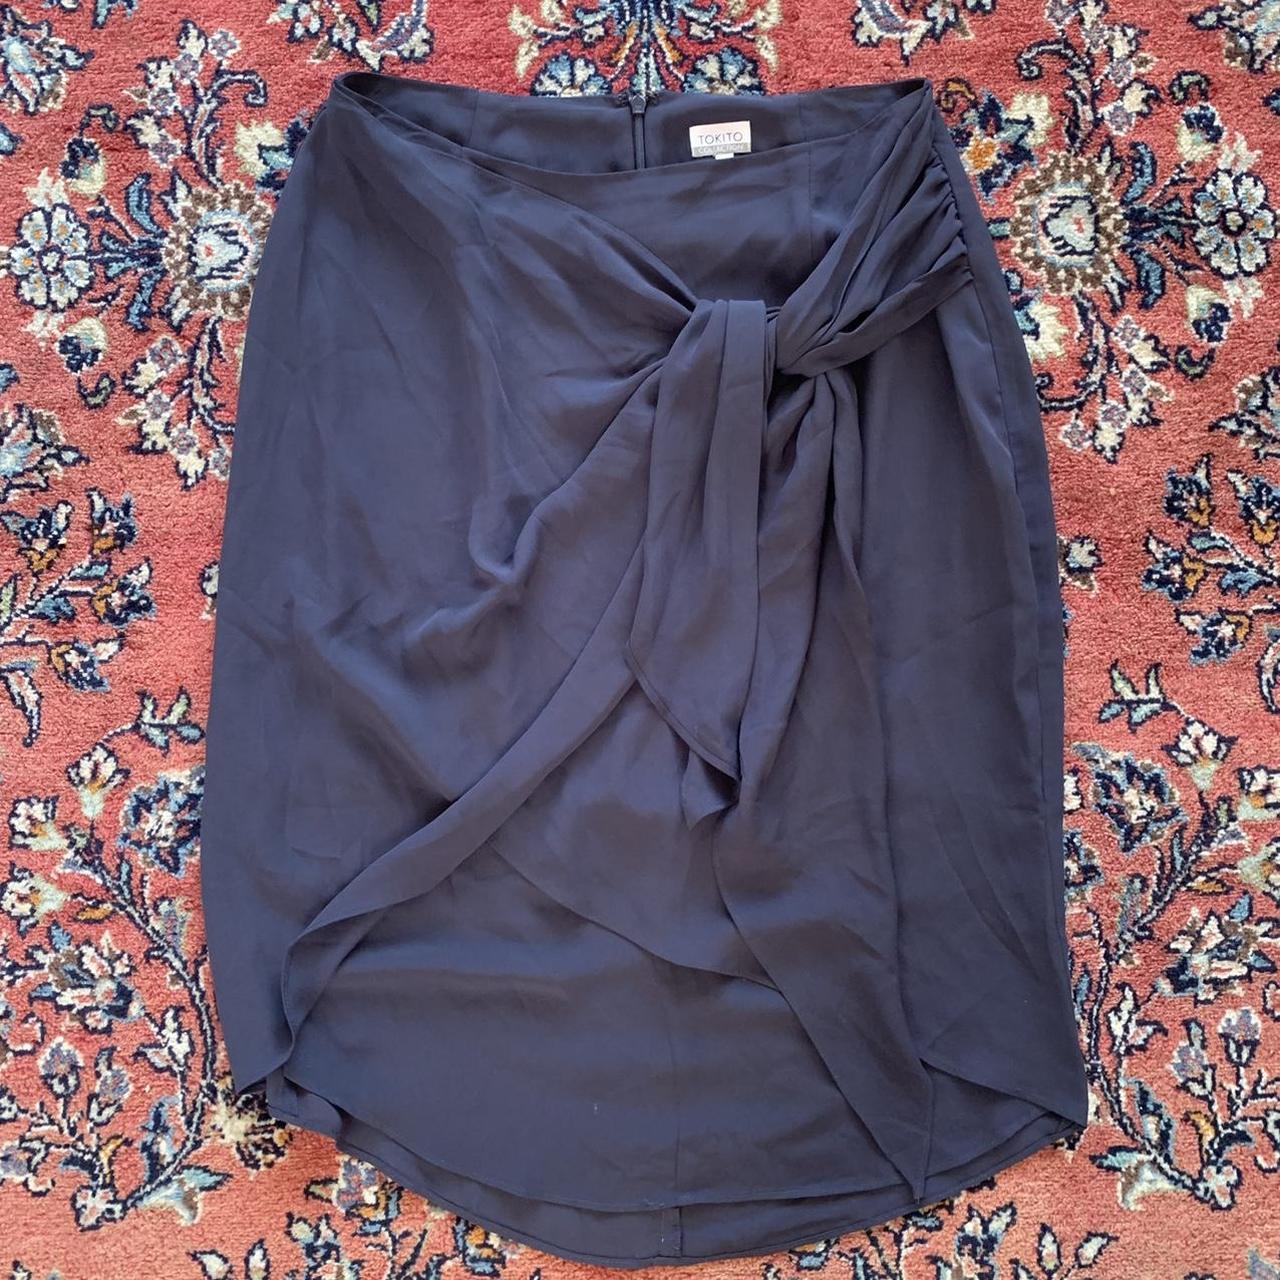 Tokito navy wrap skirt Awesome for work but no... - Depop